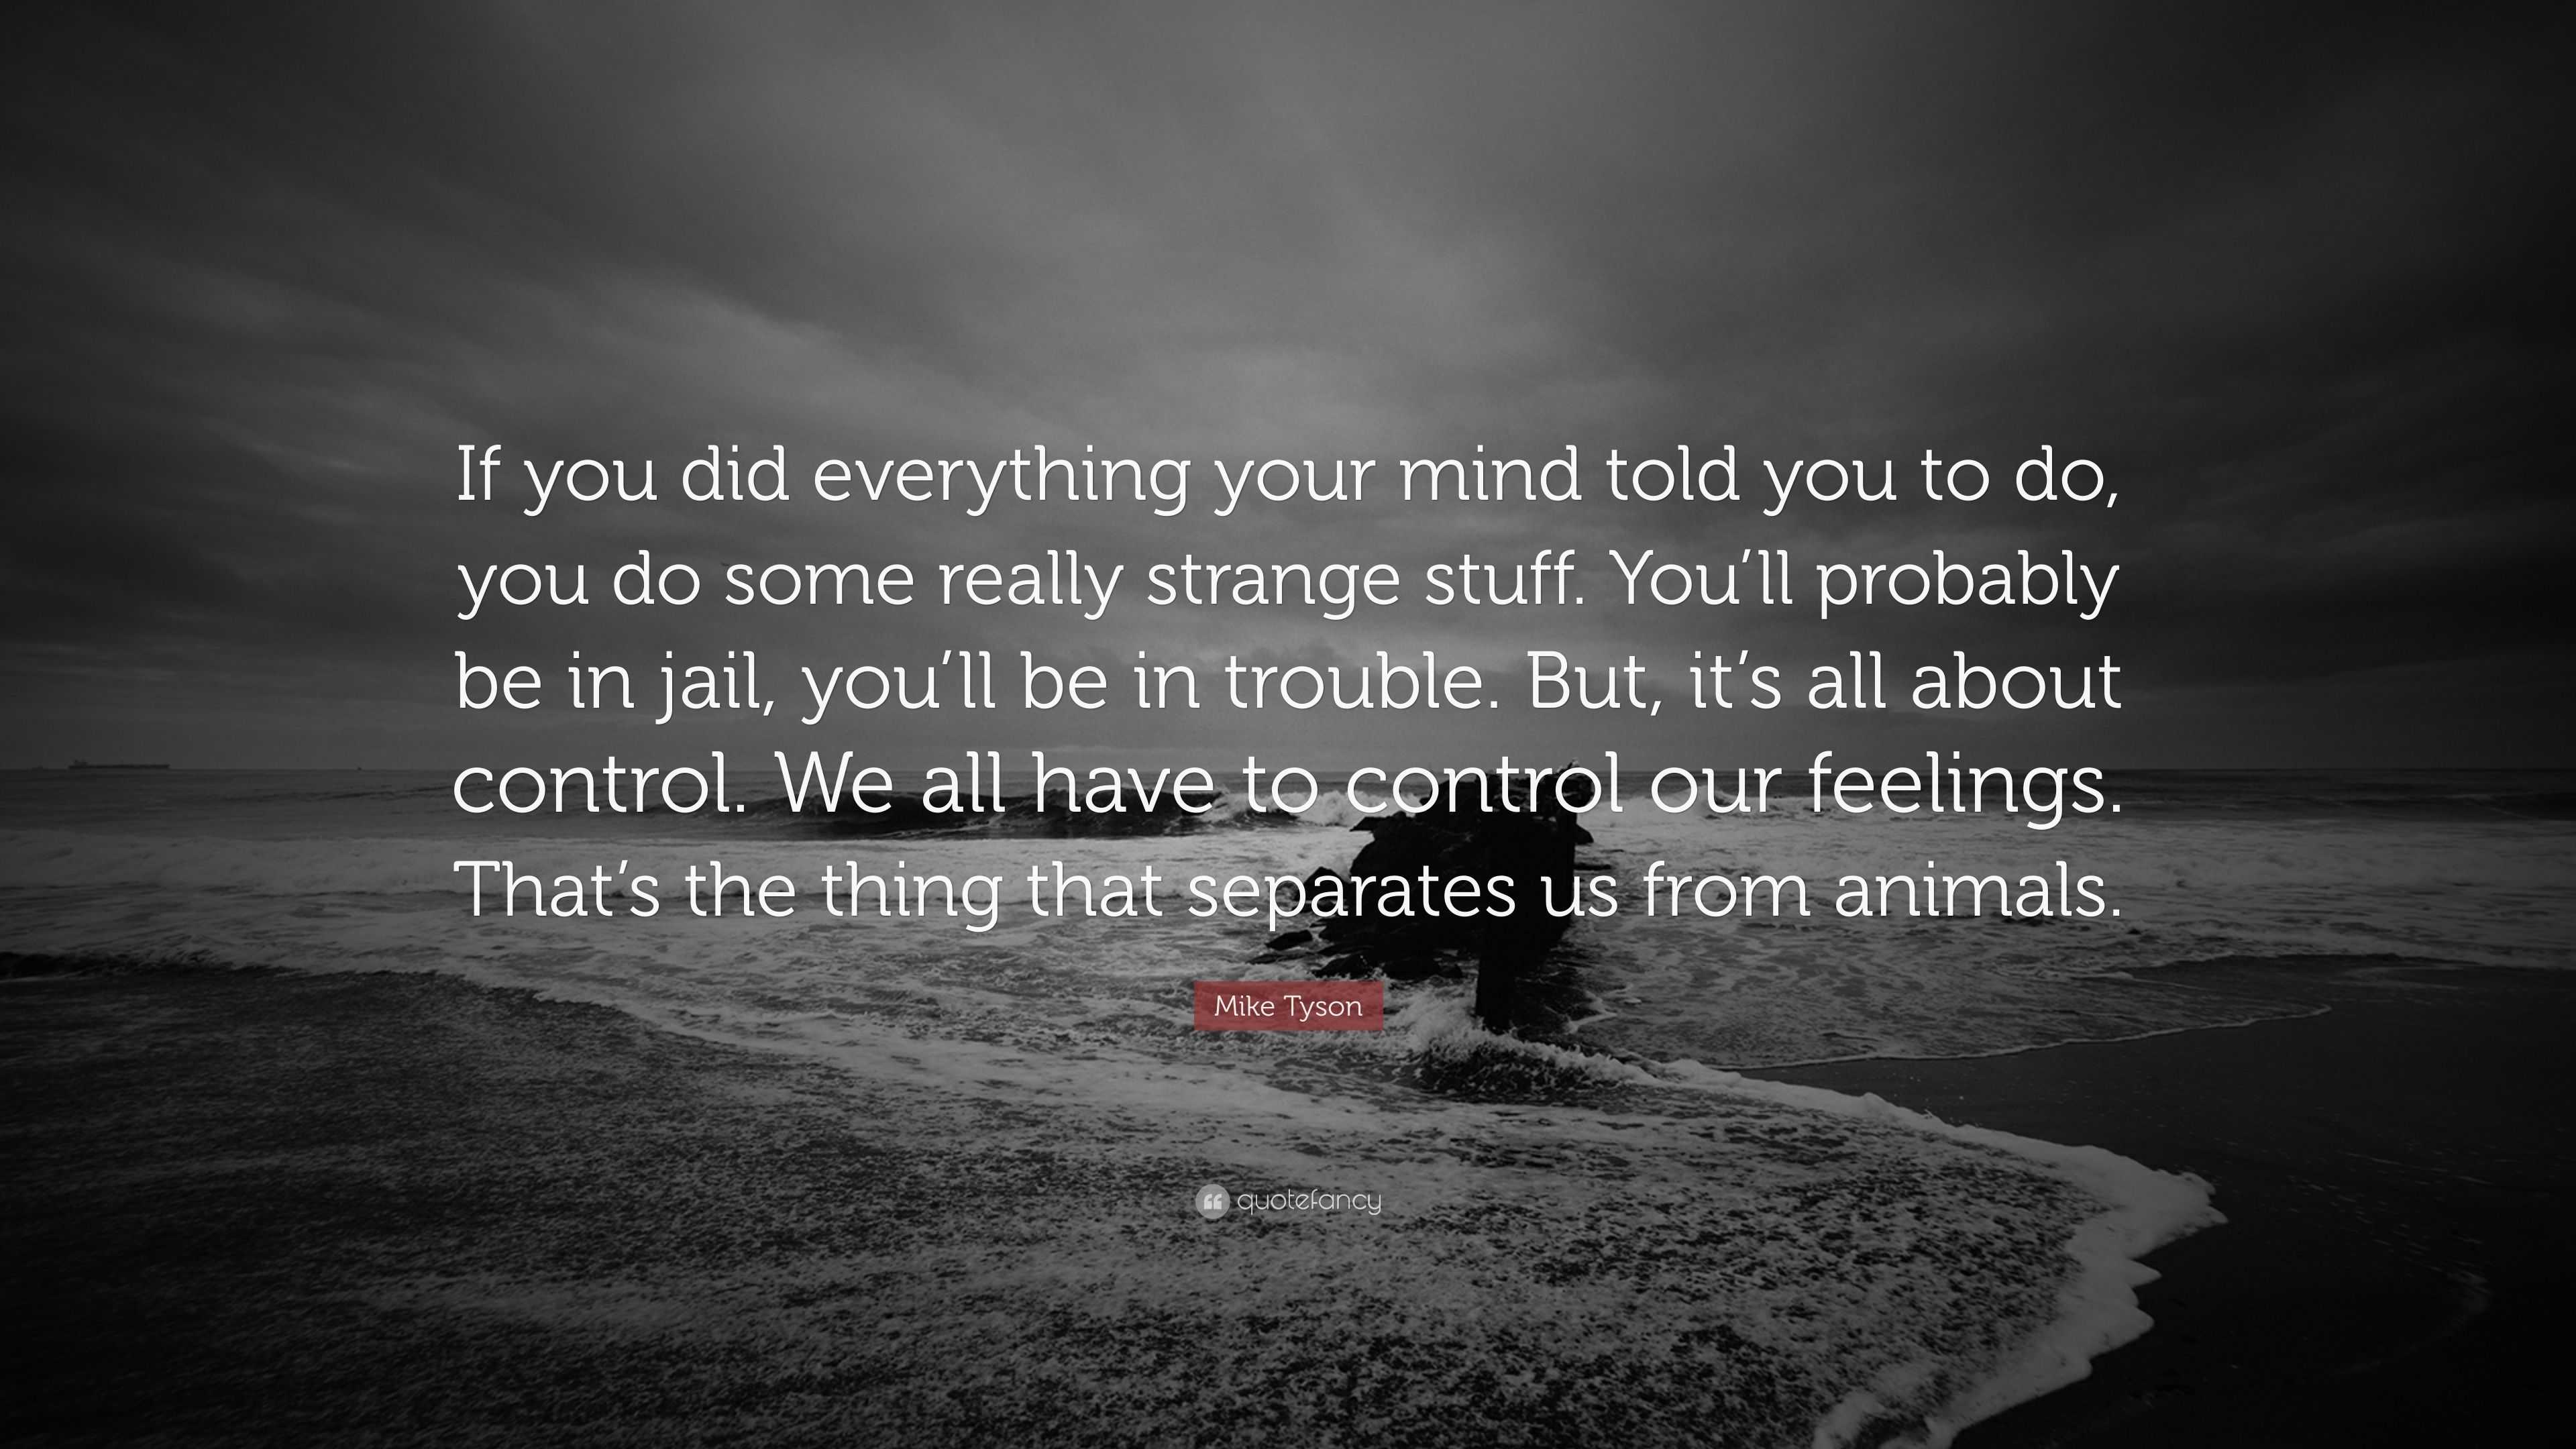 Mike Tyson Quote: “If you did everything your mind told you to do, you do  some really strange stuff. You'll probably be in jail, you'll be ...”